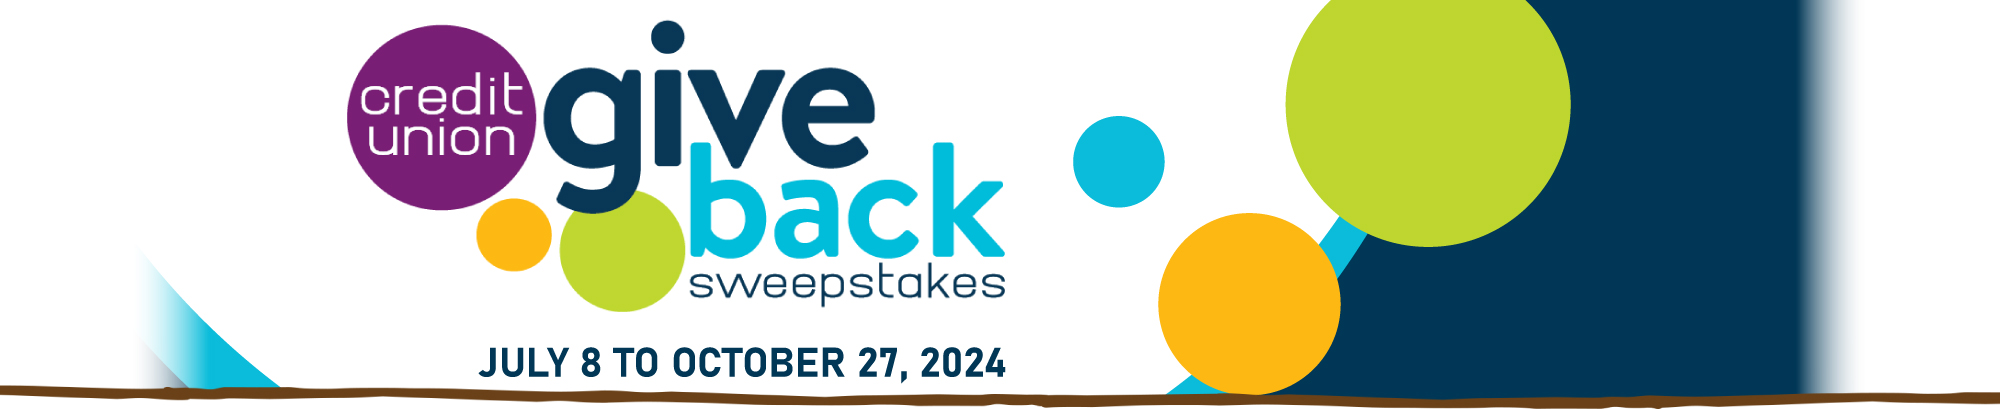 Credit Union give back sweepstakes. July 8 to October 27, 2024